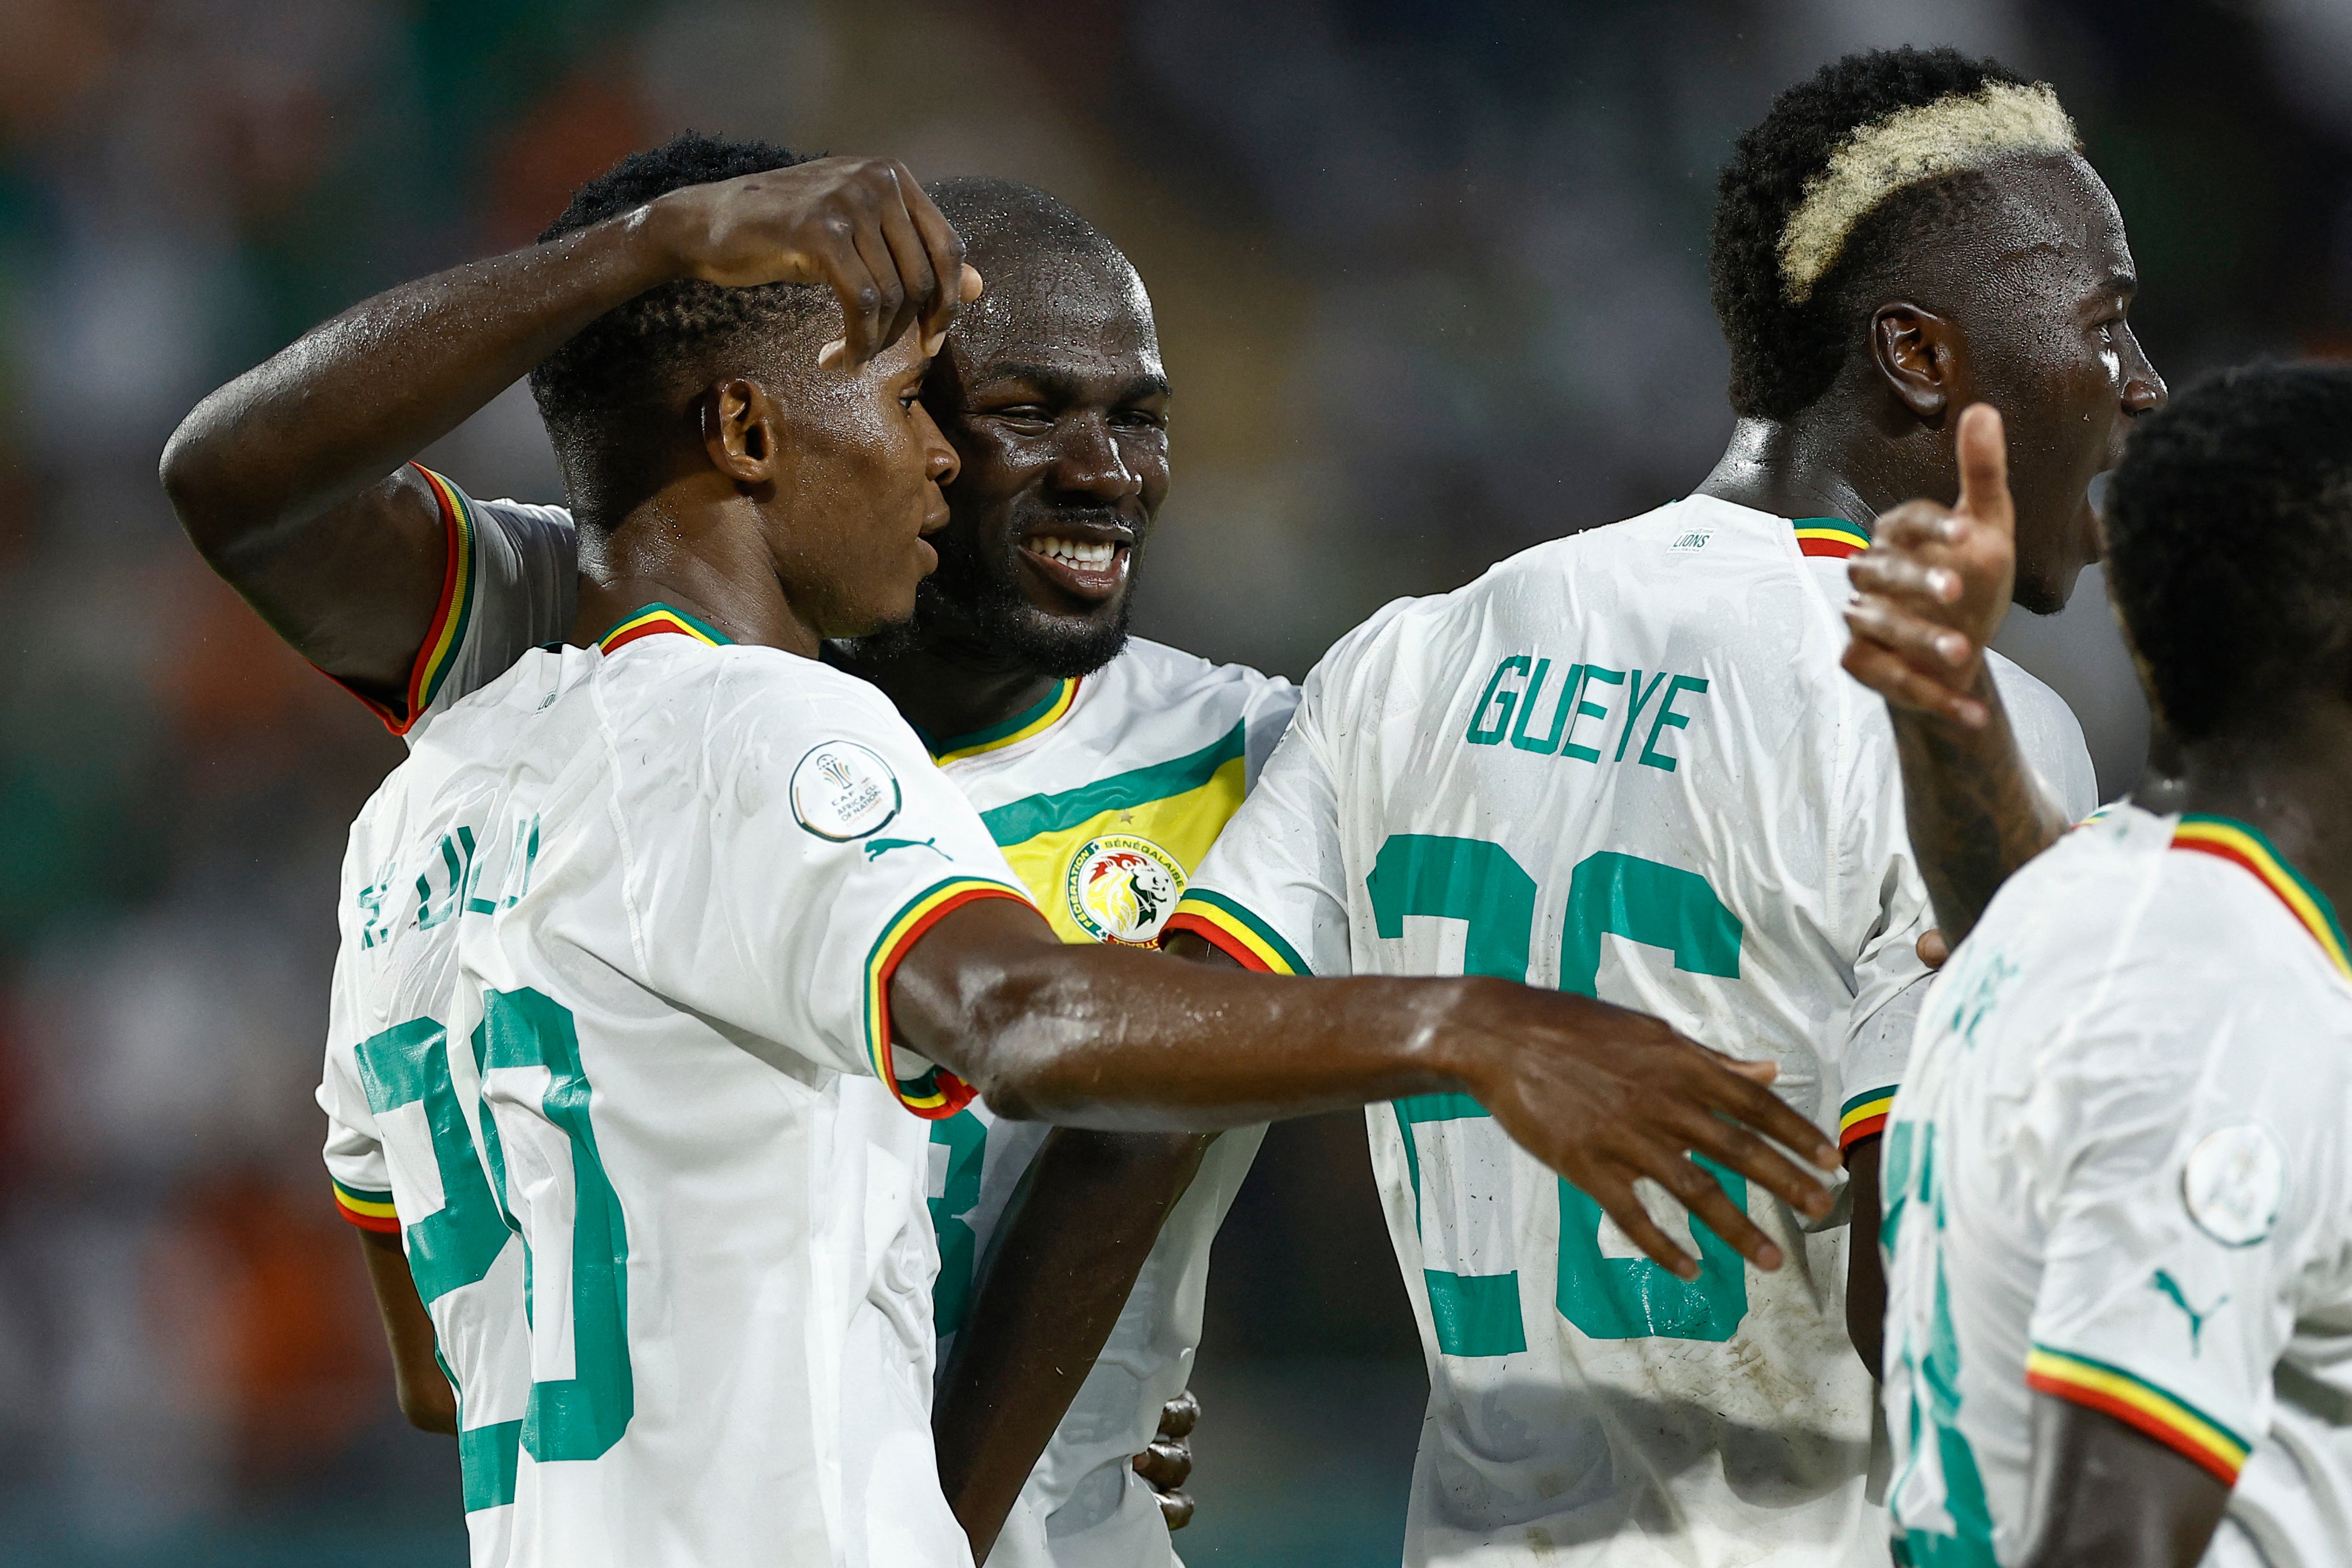 Senegal reached the knockout rounds of the Africa Cup of Nations after just two games